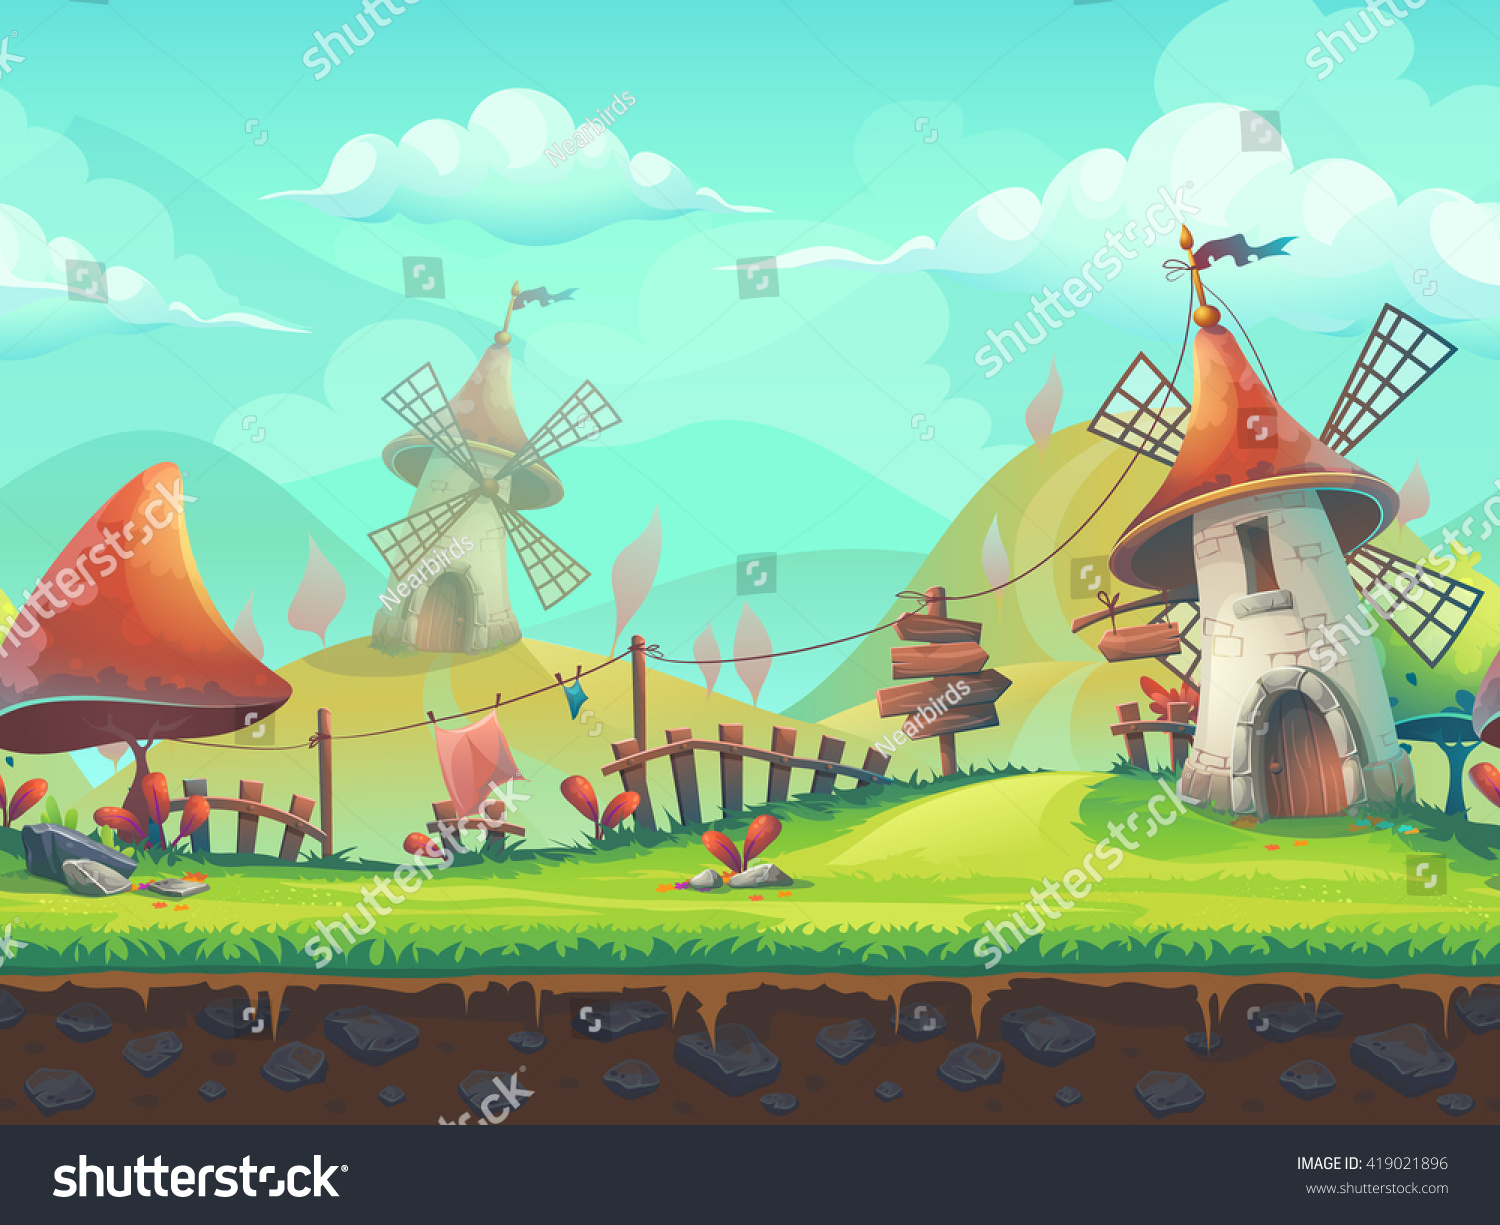 Seamless cartoon stylized vector illustration on the theme of the European landscape with a windmill. For print, create videos or web graphic design, user interface, card, poster. #419021896